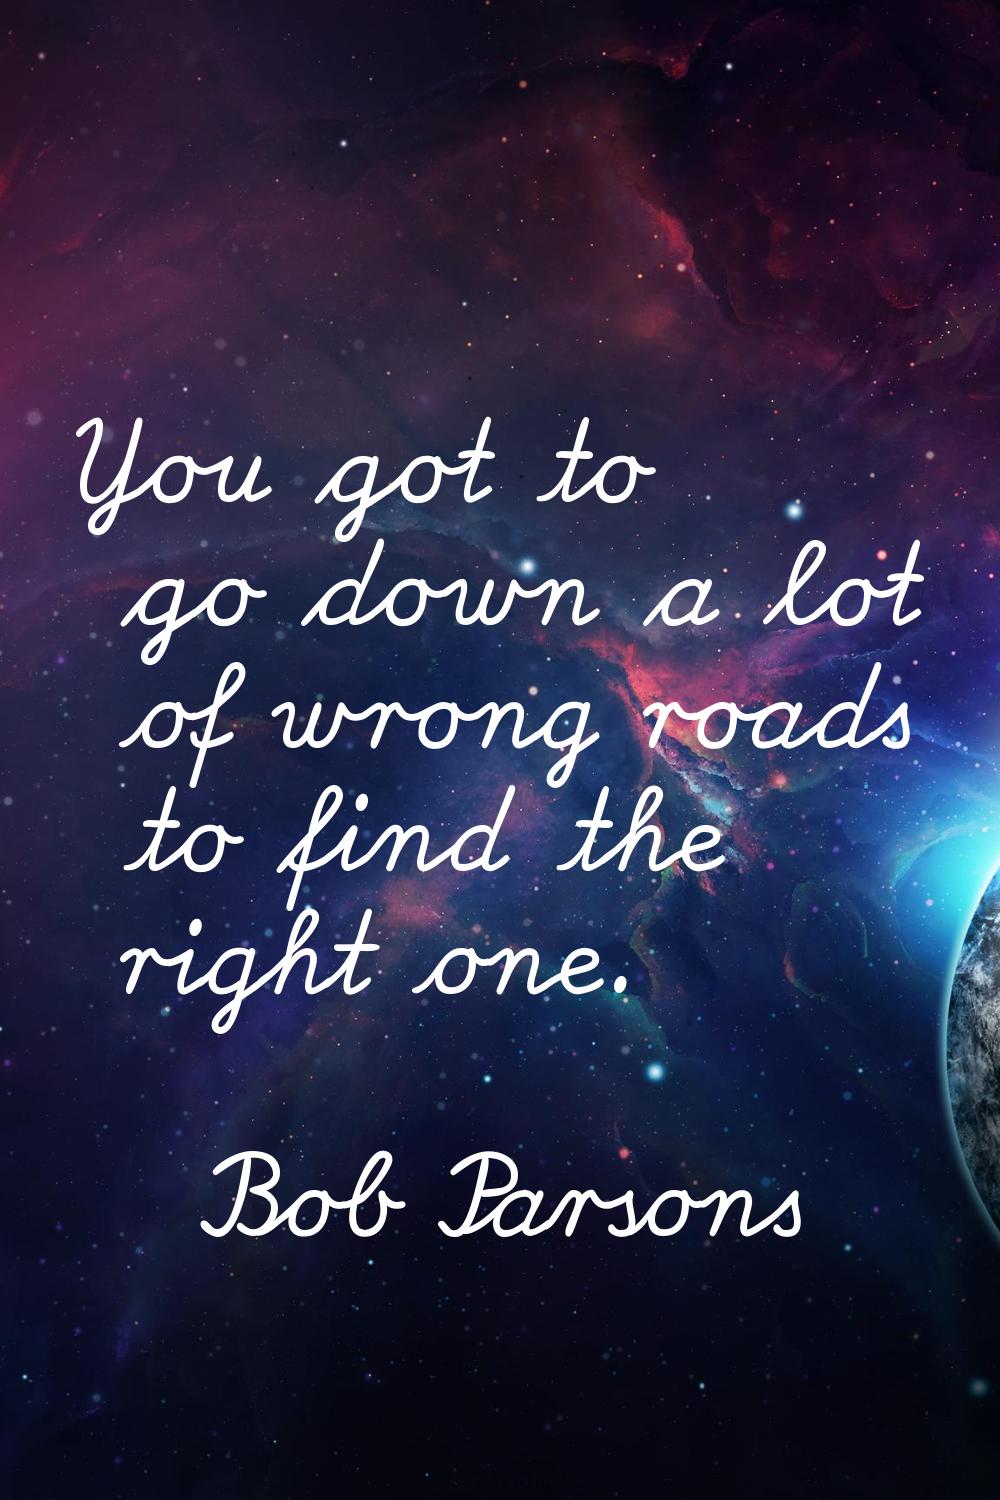 You got to go down a lot of wrong roads to find the right one.